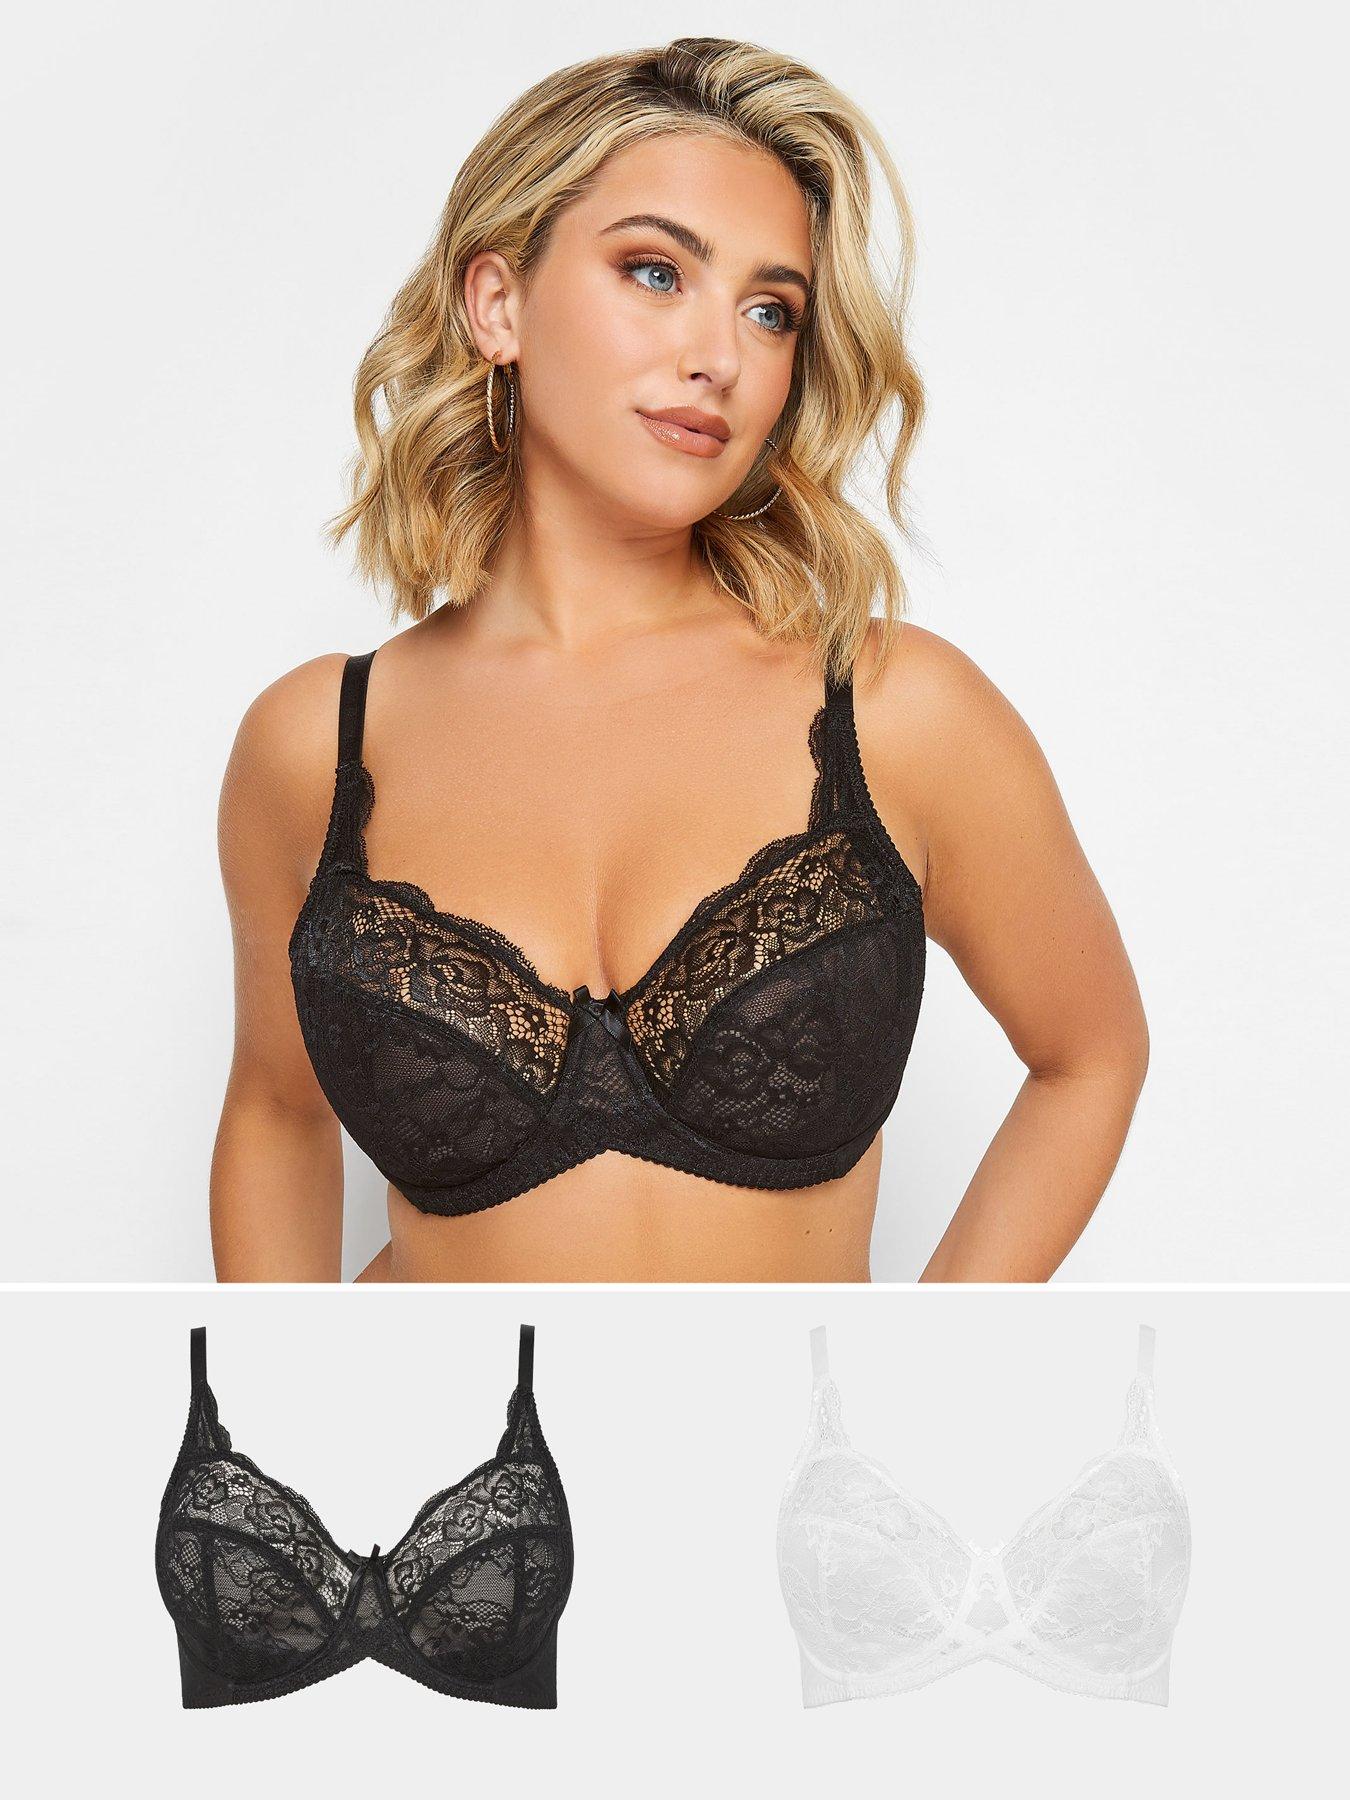 Lace Bras 48C, Bras for Large Breasts